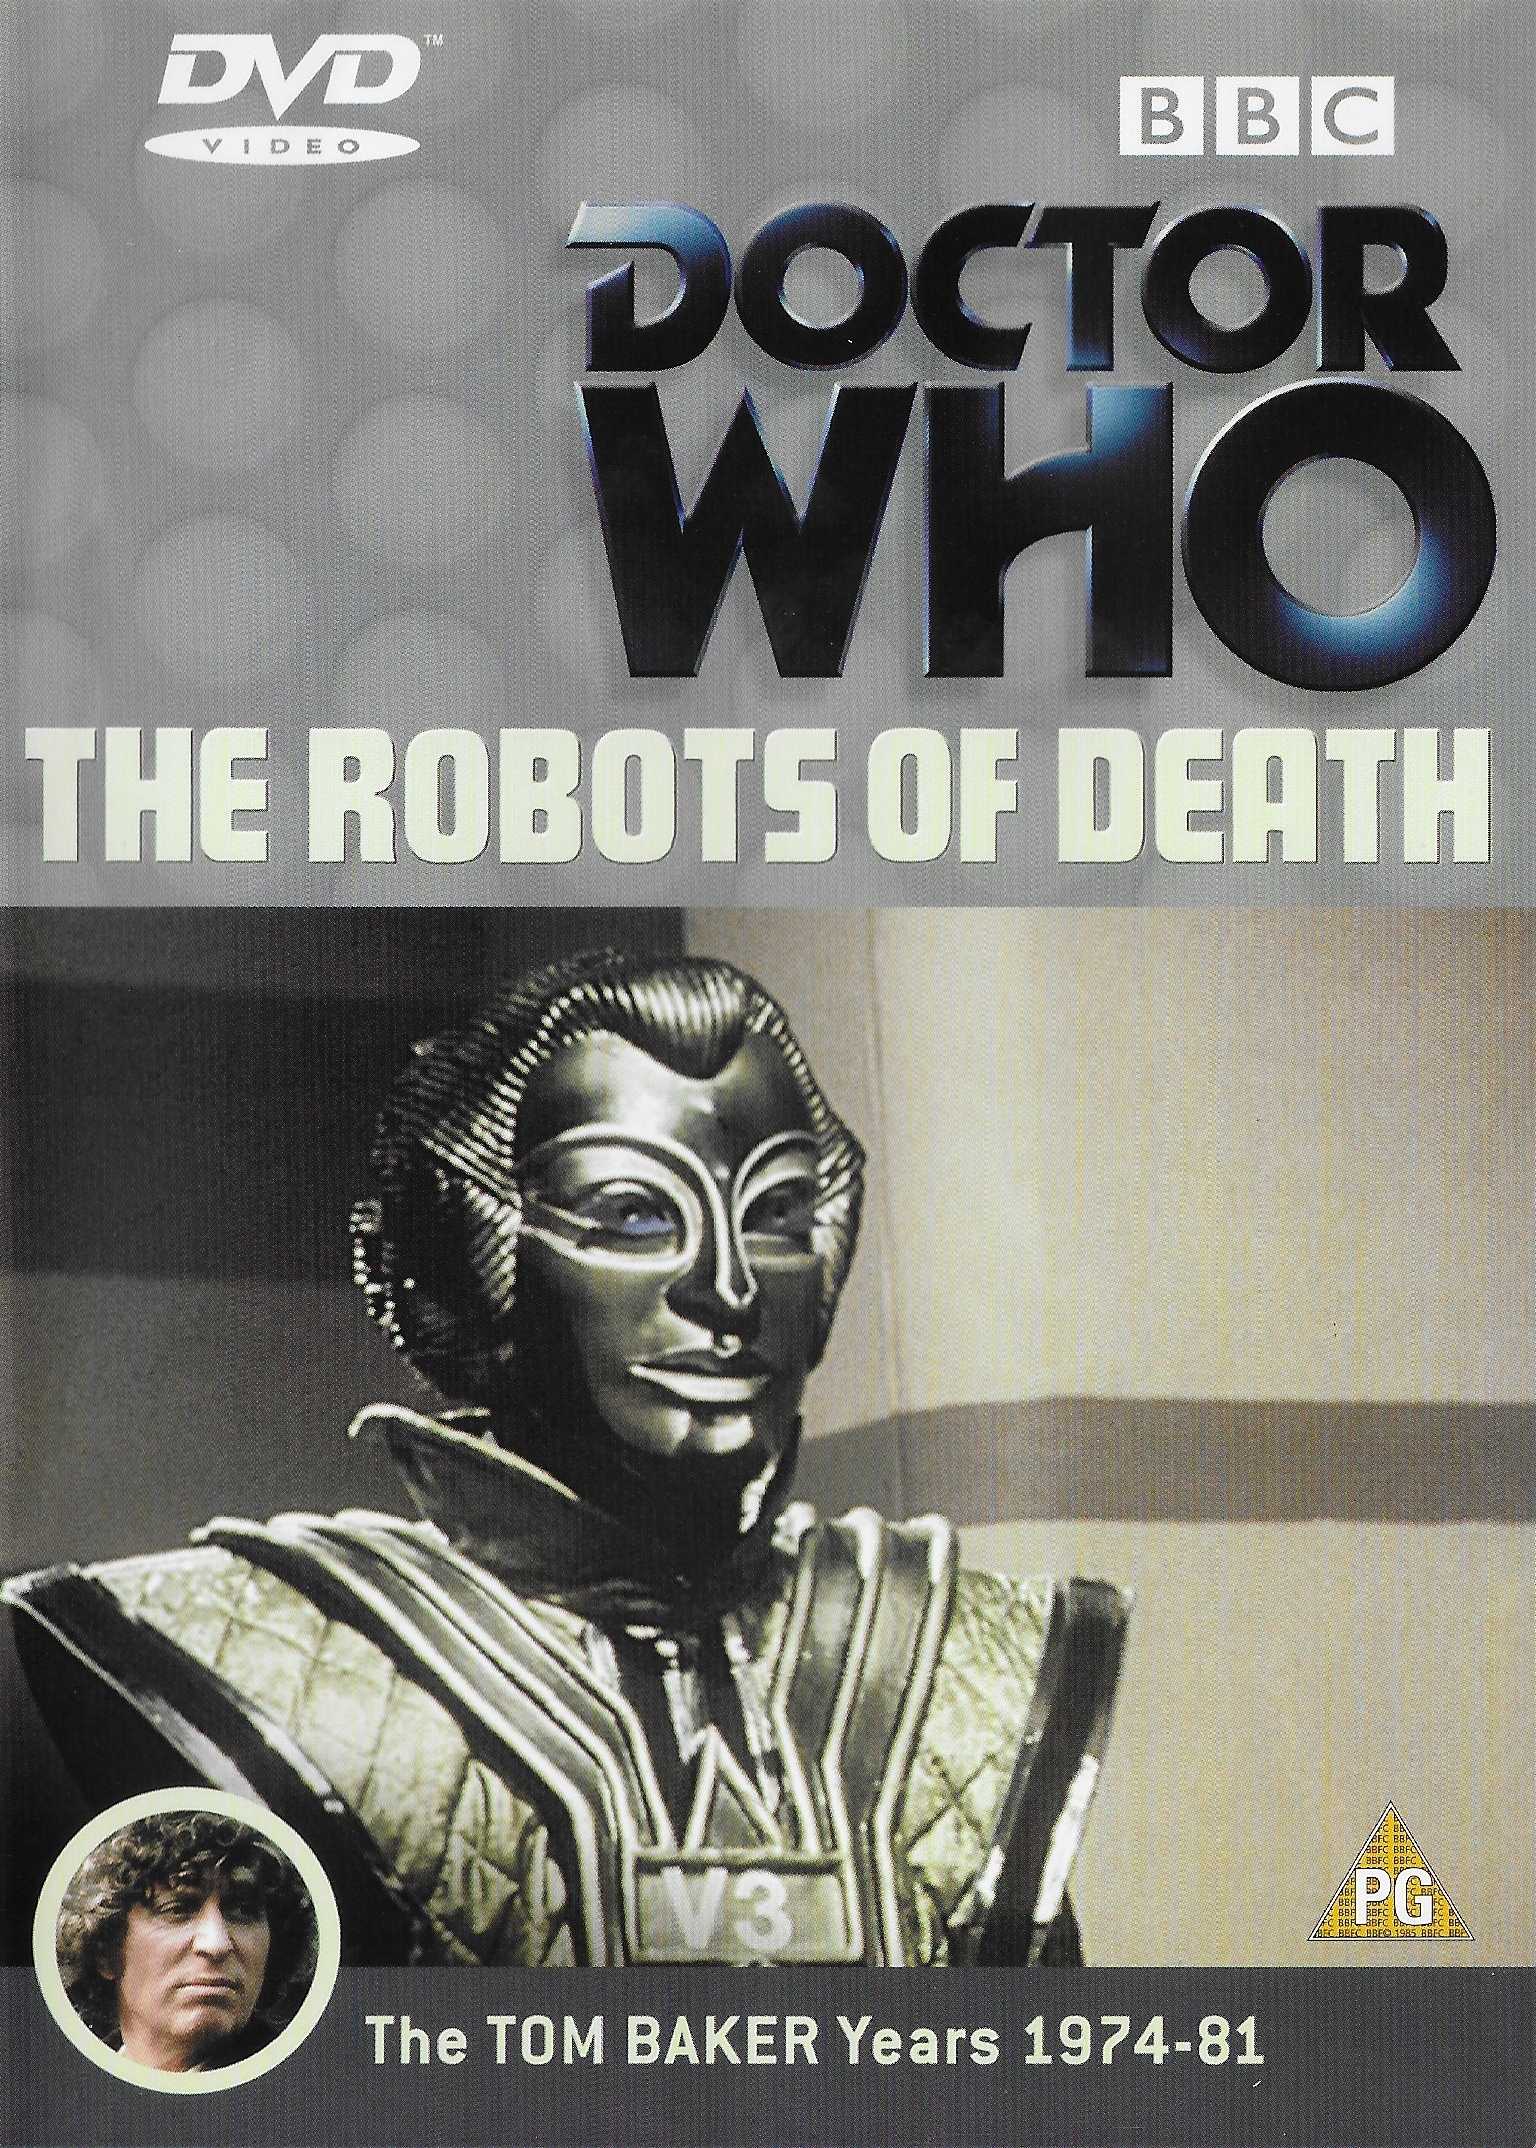 Picture of BBCDVD 1012 Doctor Who - The robots of death by artist Chris Boucher from the BBC records and Tapes library